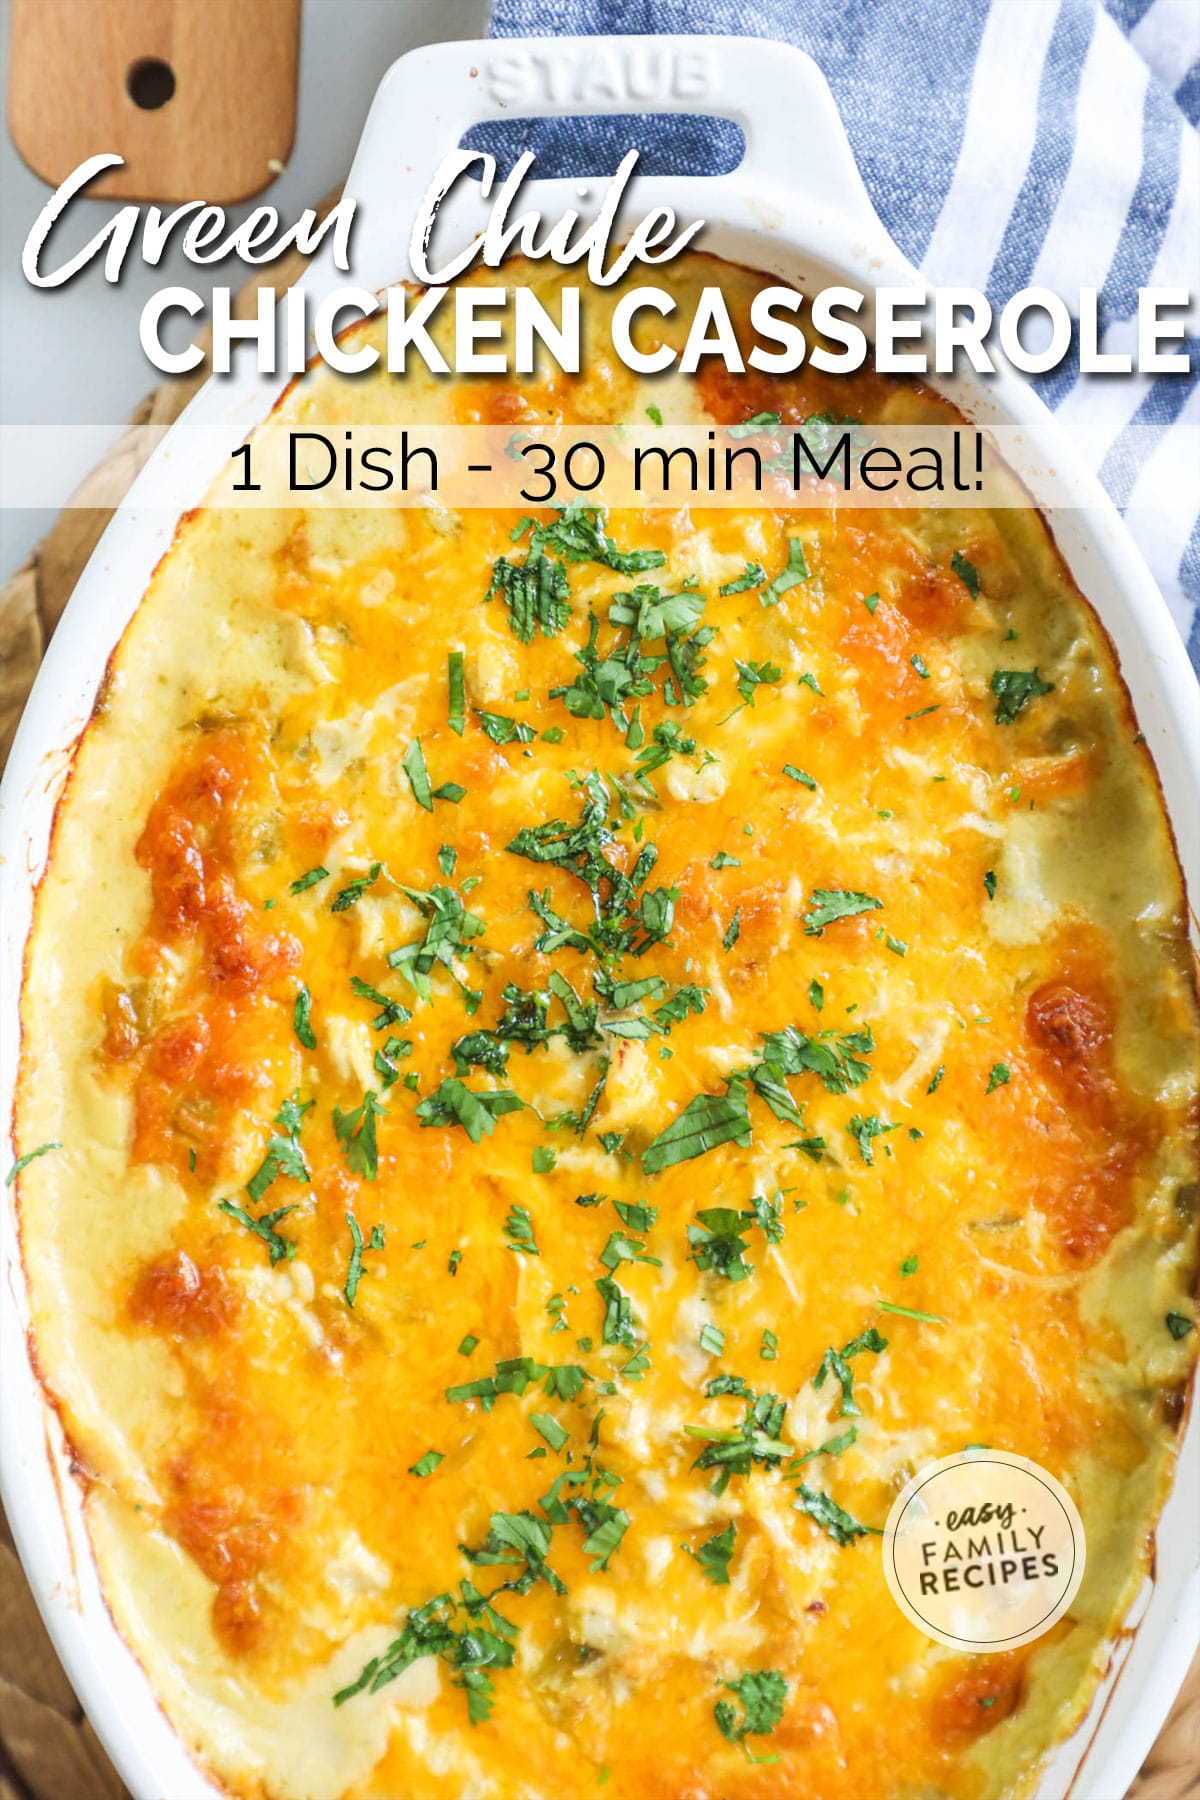 Casserole dish with Baked Green Chile Chicken Casserole made with shredded rotisserie chicken.